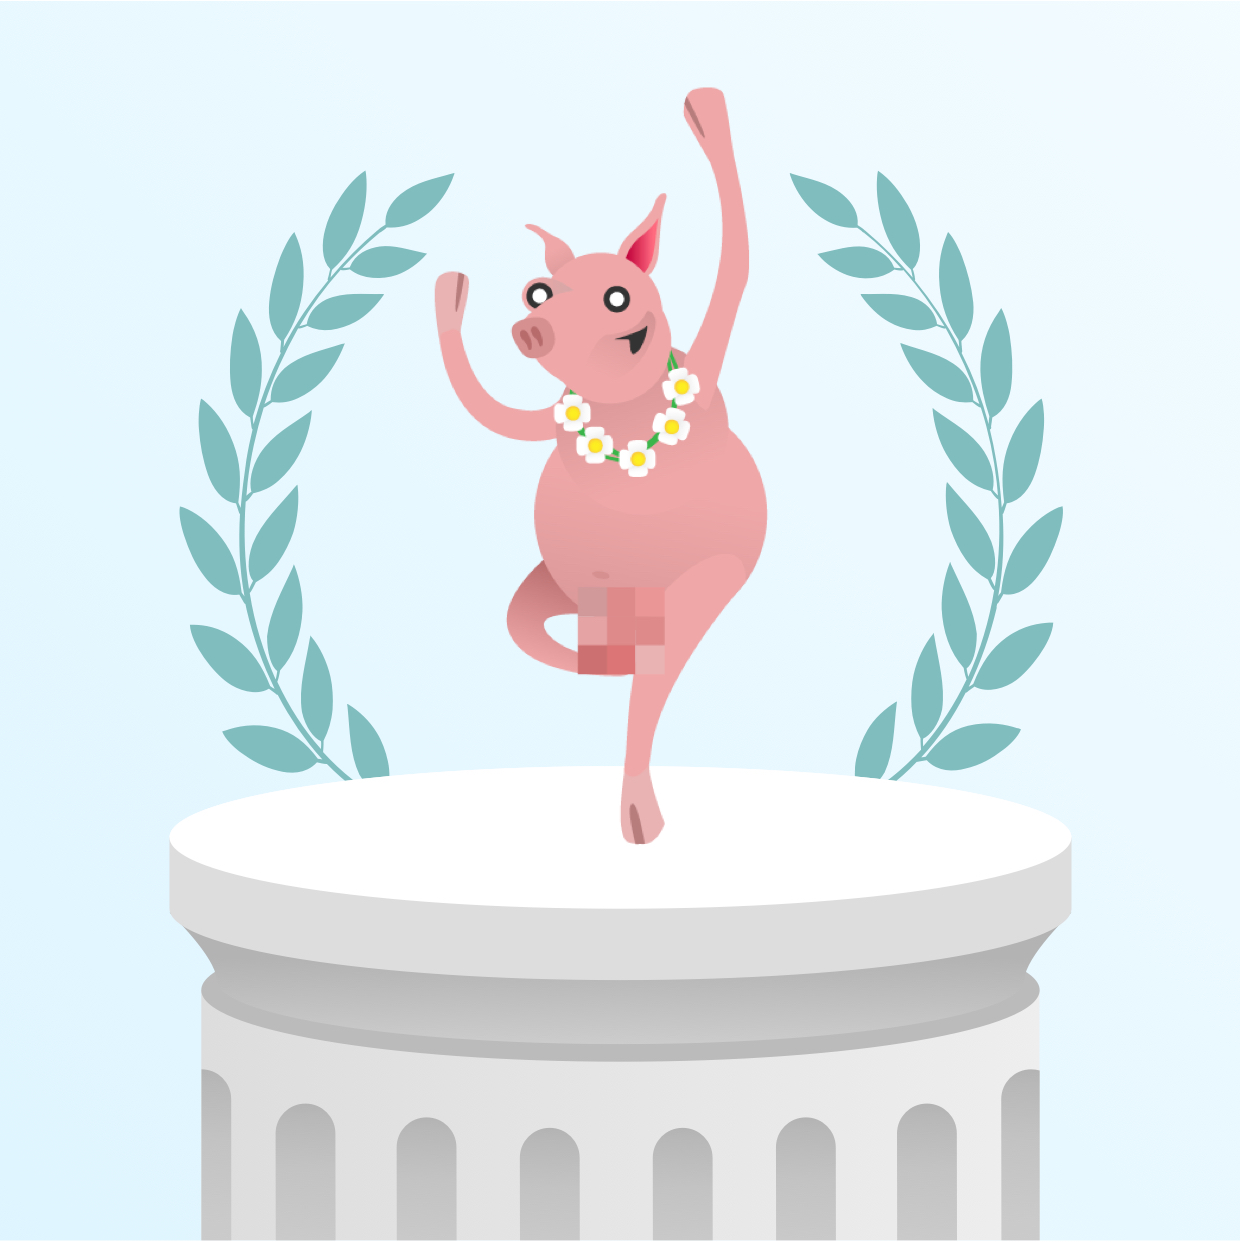 A tenant's pig avatar celebrated completing their application.